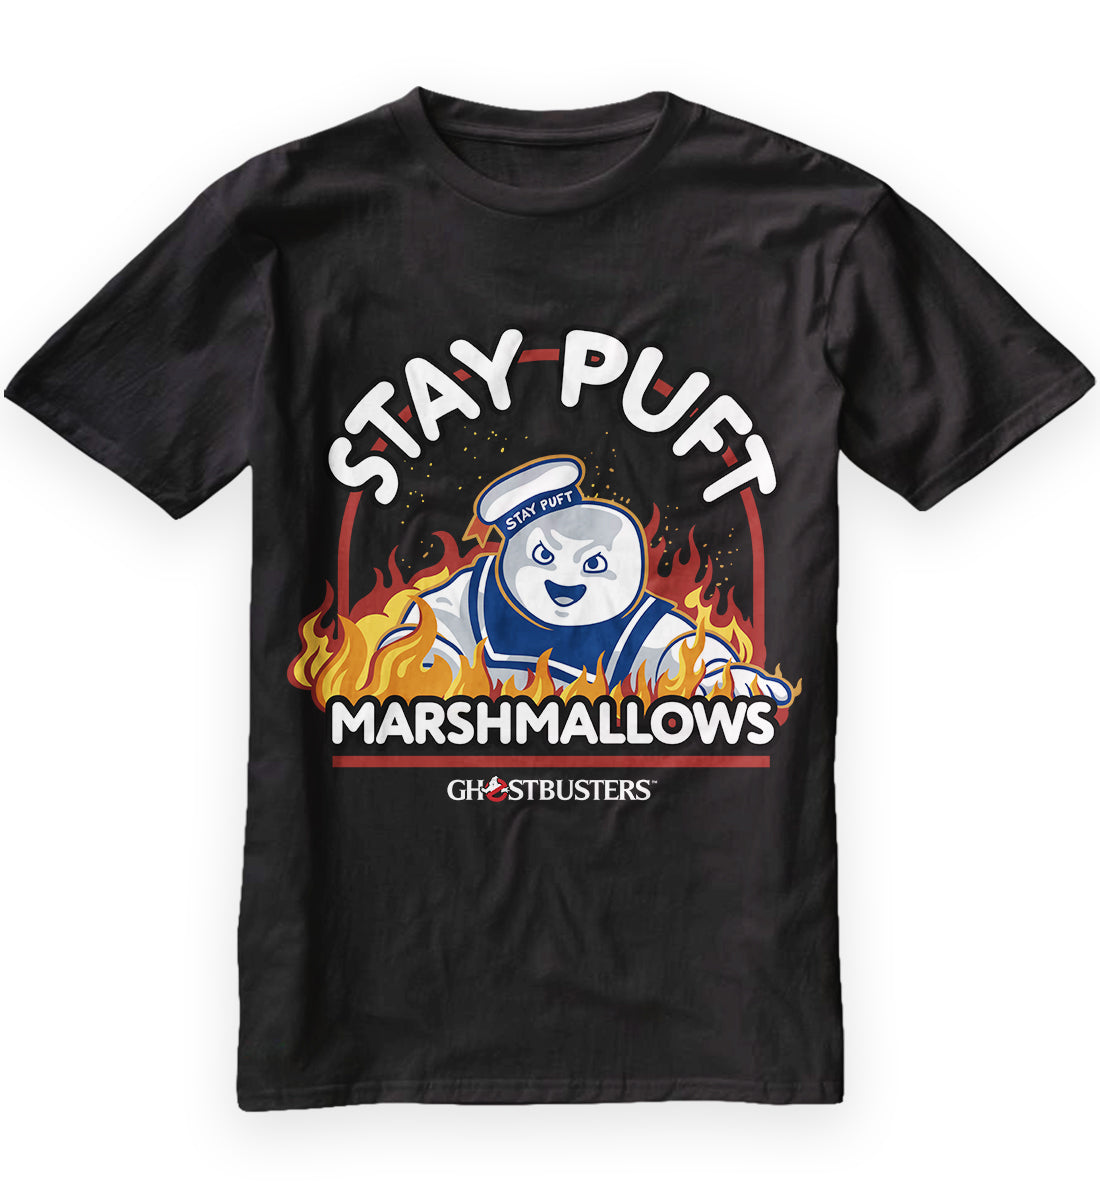 Stay Puft Marshmallows Ghostbusters T-Shirt